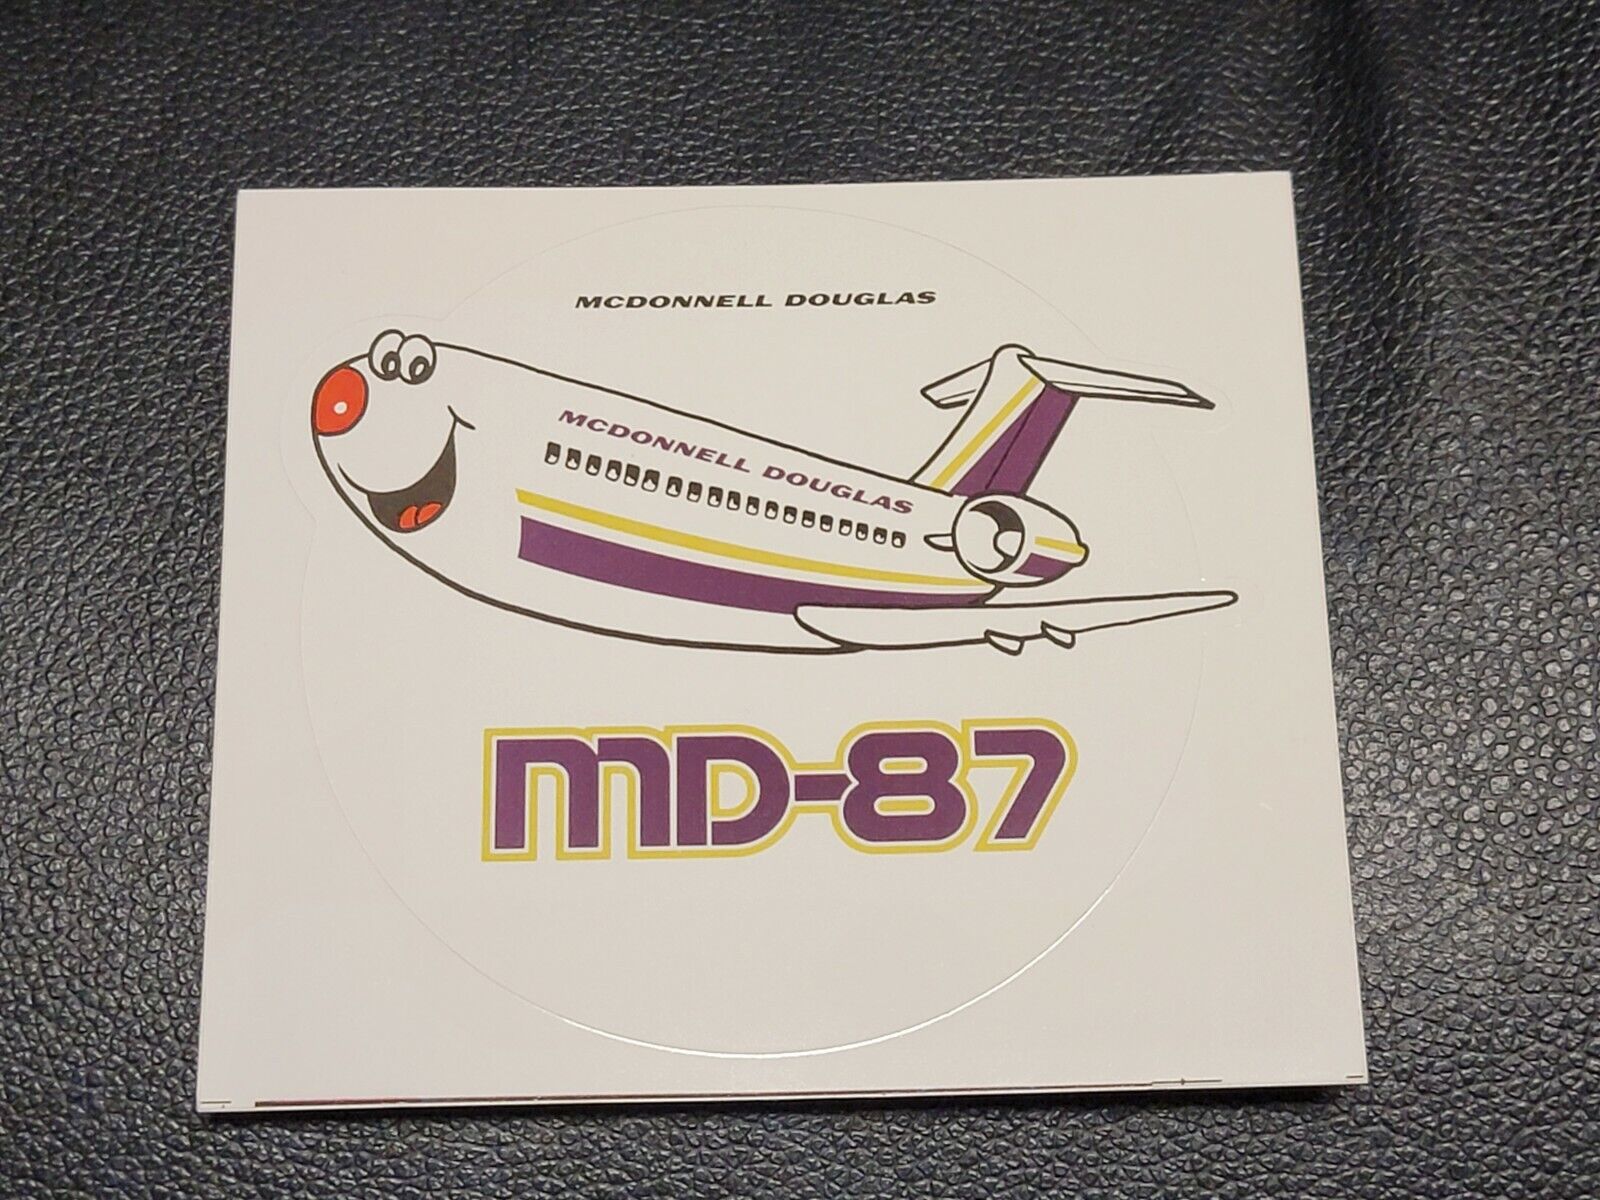 VINTAGE 1980s MCDONNELL DOUGLAS MD-87 AIRCRAFT STICKER DECAL NEW